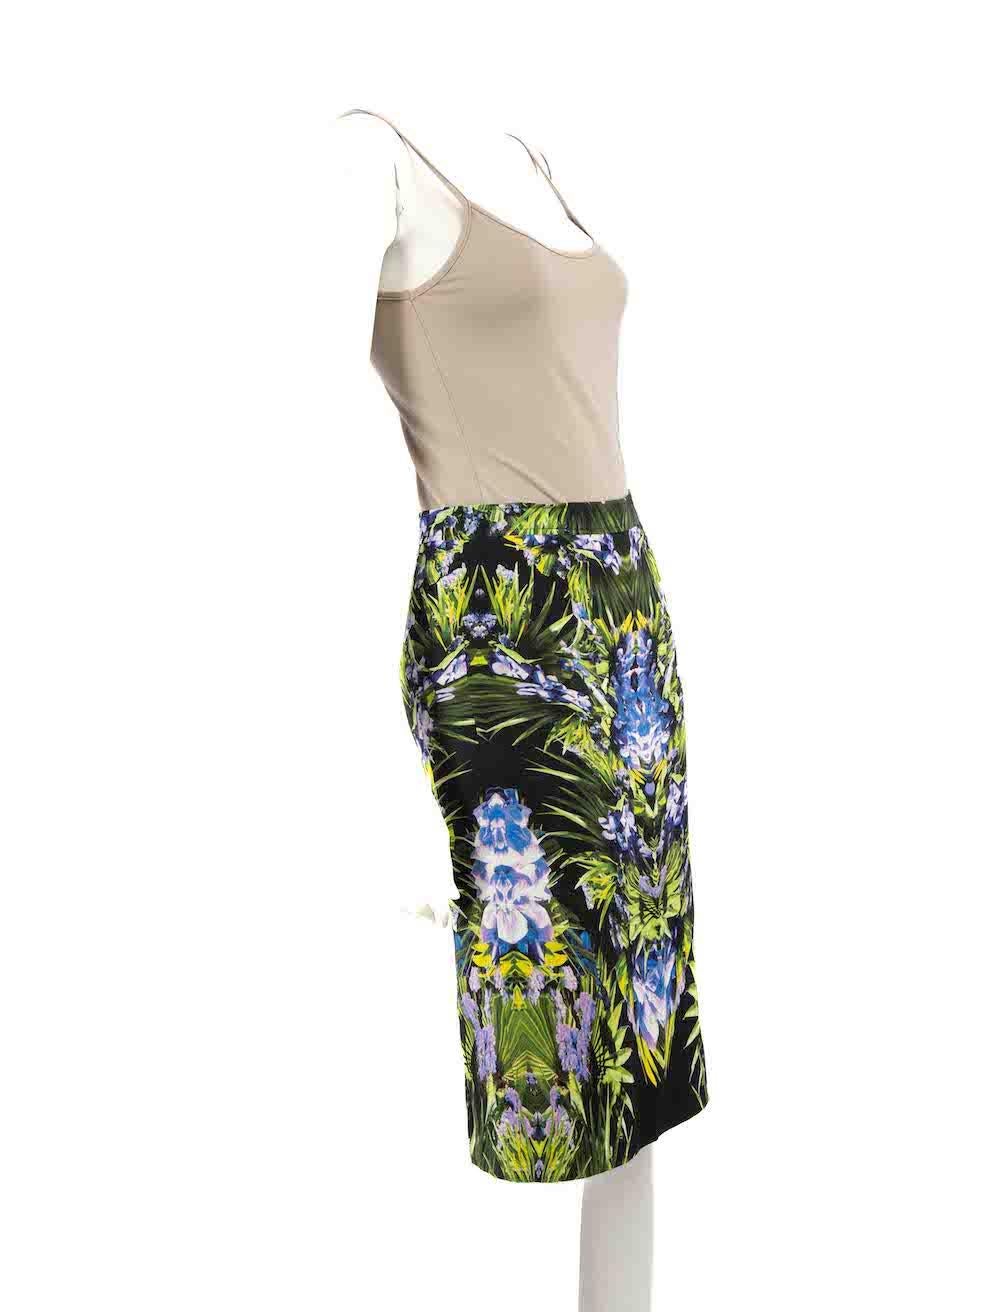 Condition
 
 CONDITION is Very good. Hardly any visible wear to skirt is evident on this used Givenchy designer resale item.
 
 Details
 
 
 
 Multicolour- black, green, blue
 
 Viscose
 
 Skirt
 
 Floral pattern
 
 Knee length
 
 Back zip